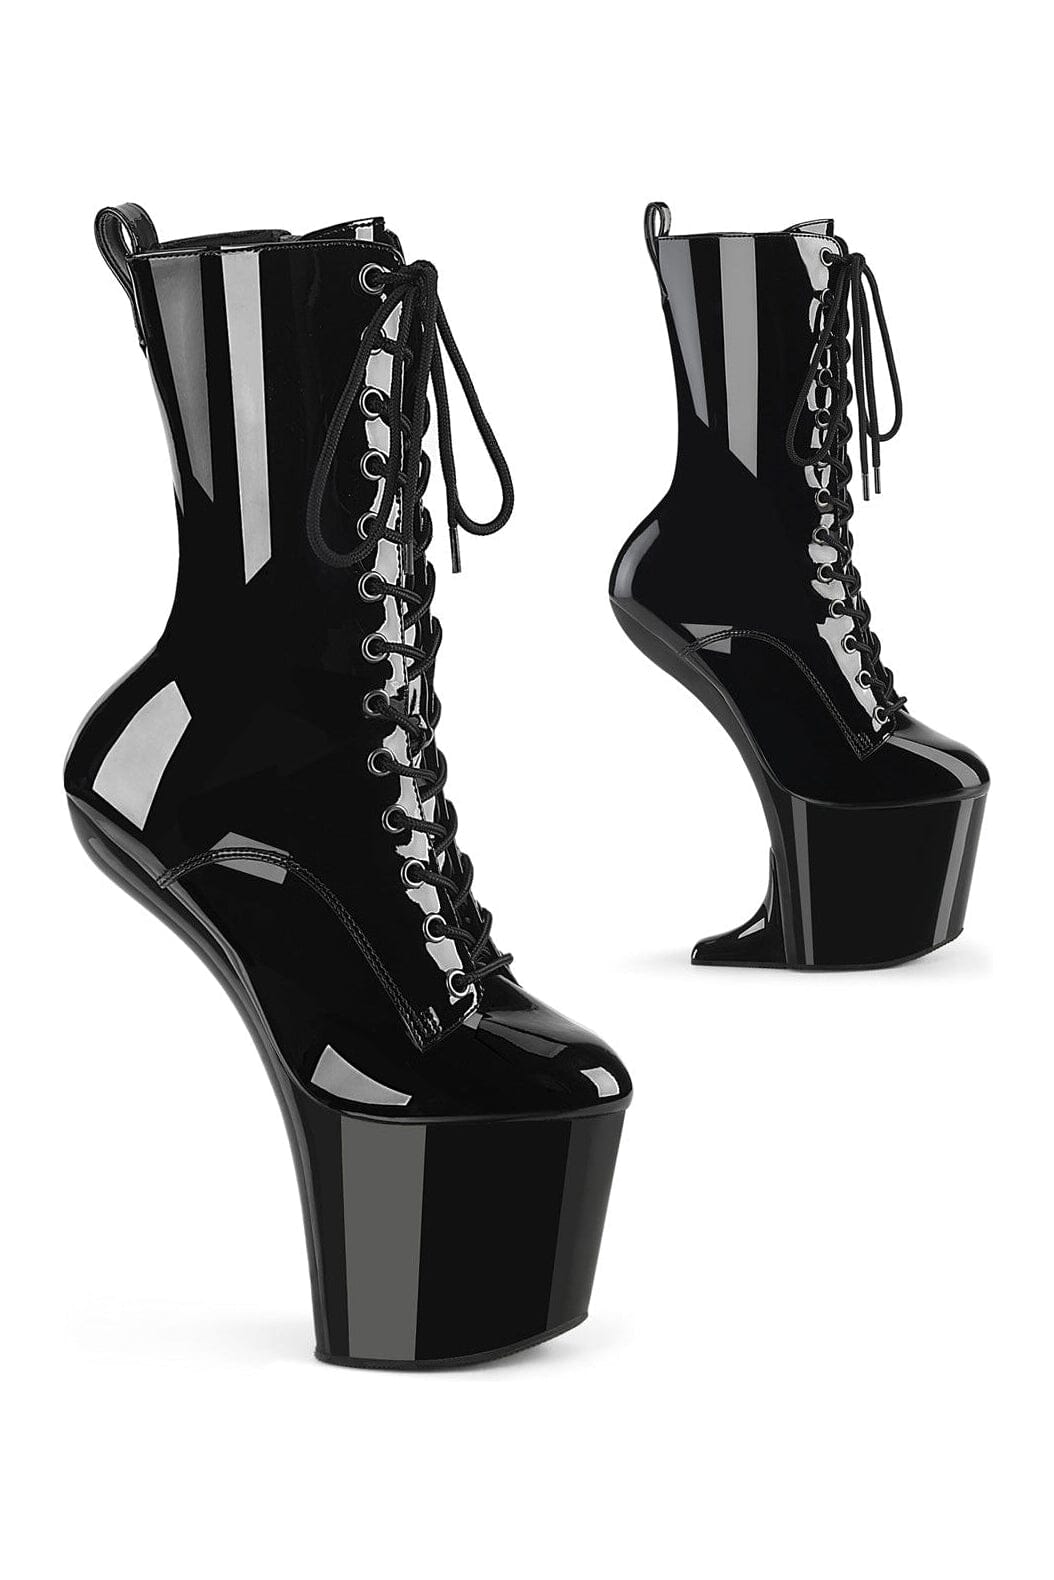 CRAZE-1040 Black Patent Ankle Boot-Ankle Boots- Stripper Shoes at SEXYSHOES.COM